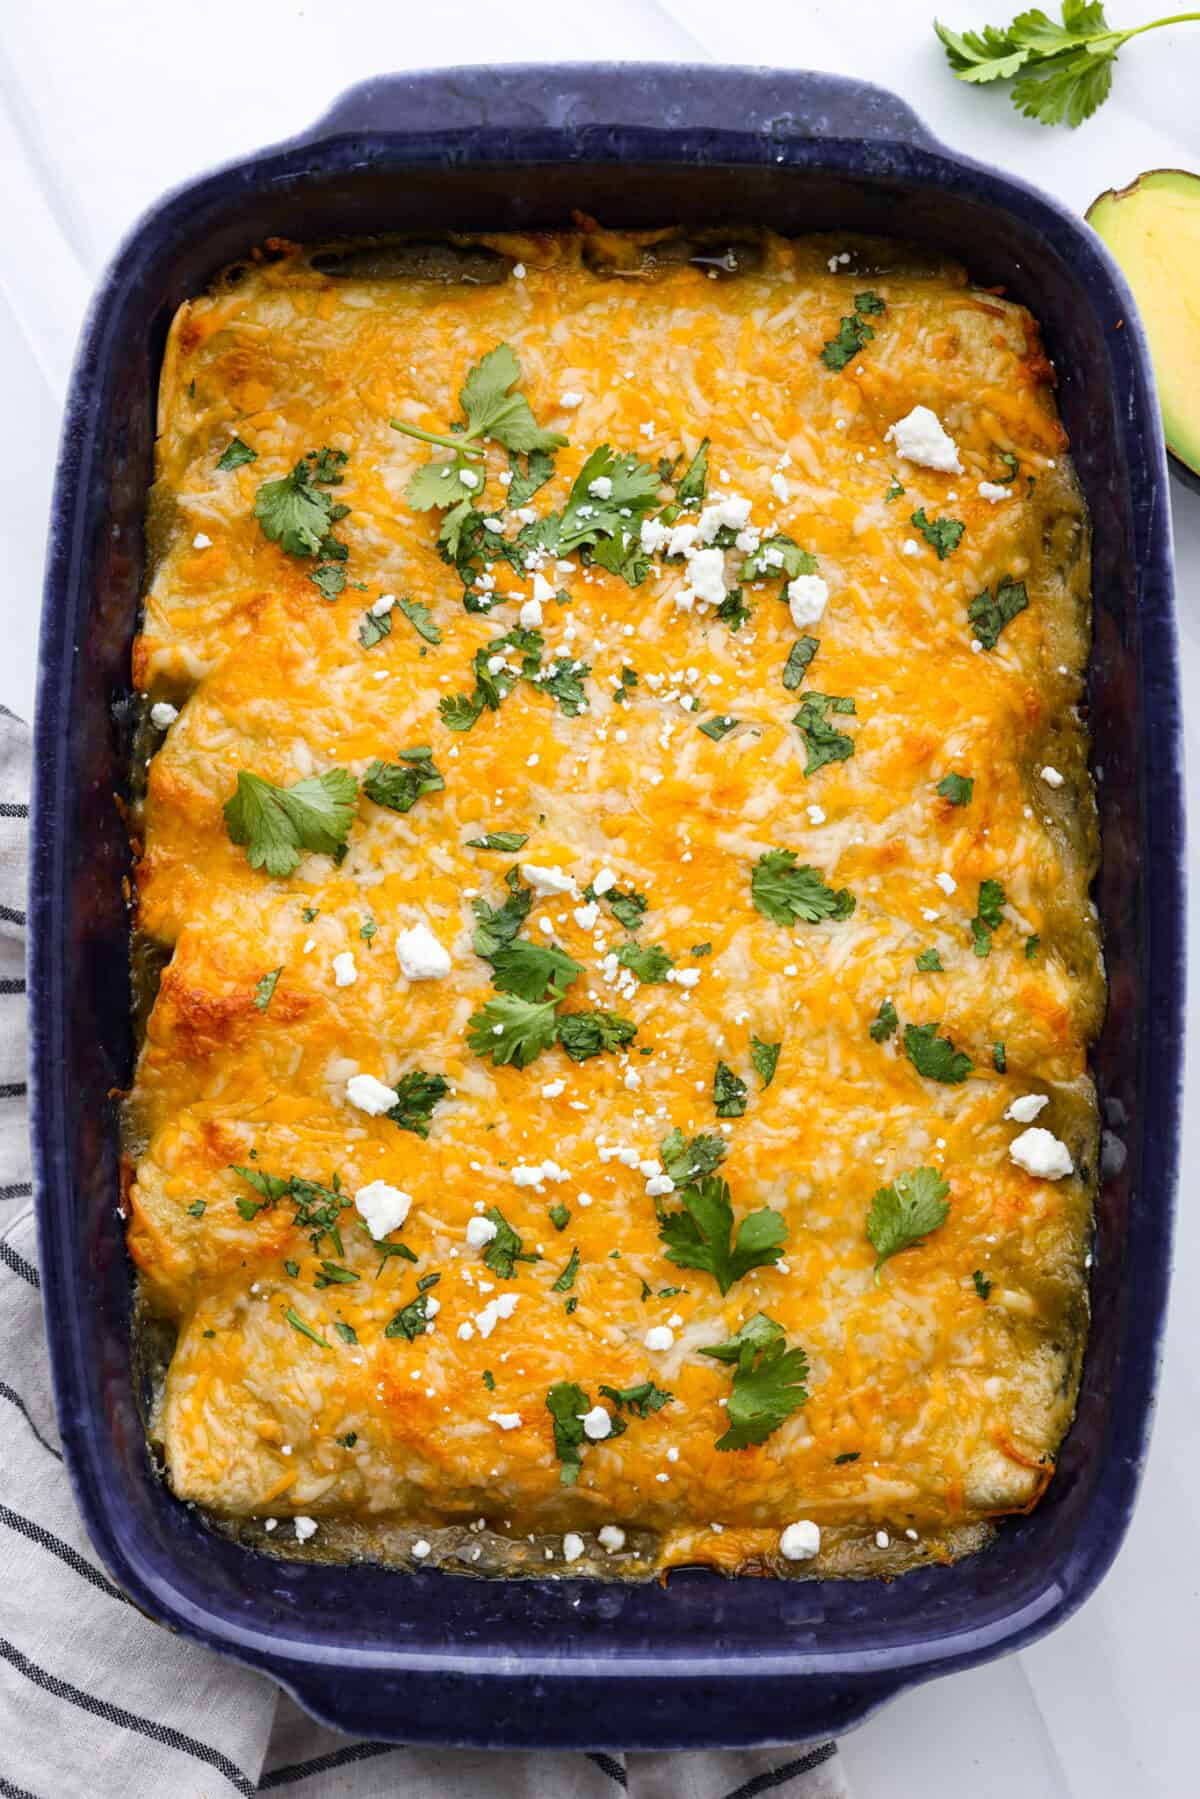 Top-down view of cream cheese enchiladas in a blue baking dish.